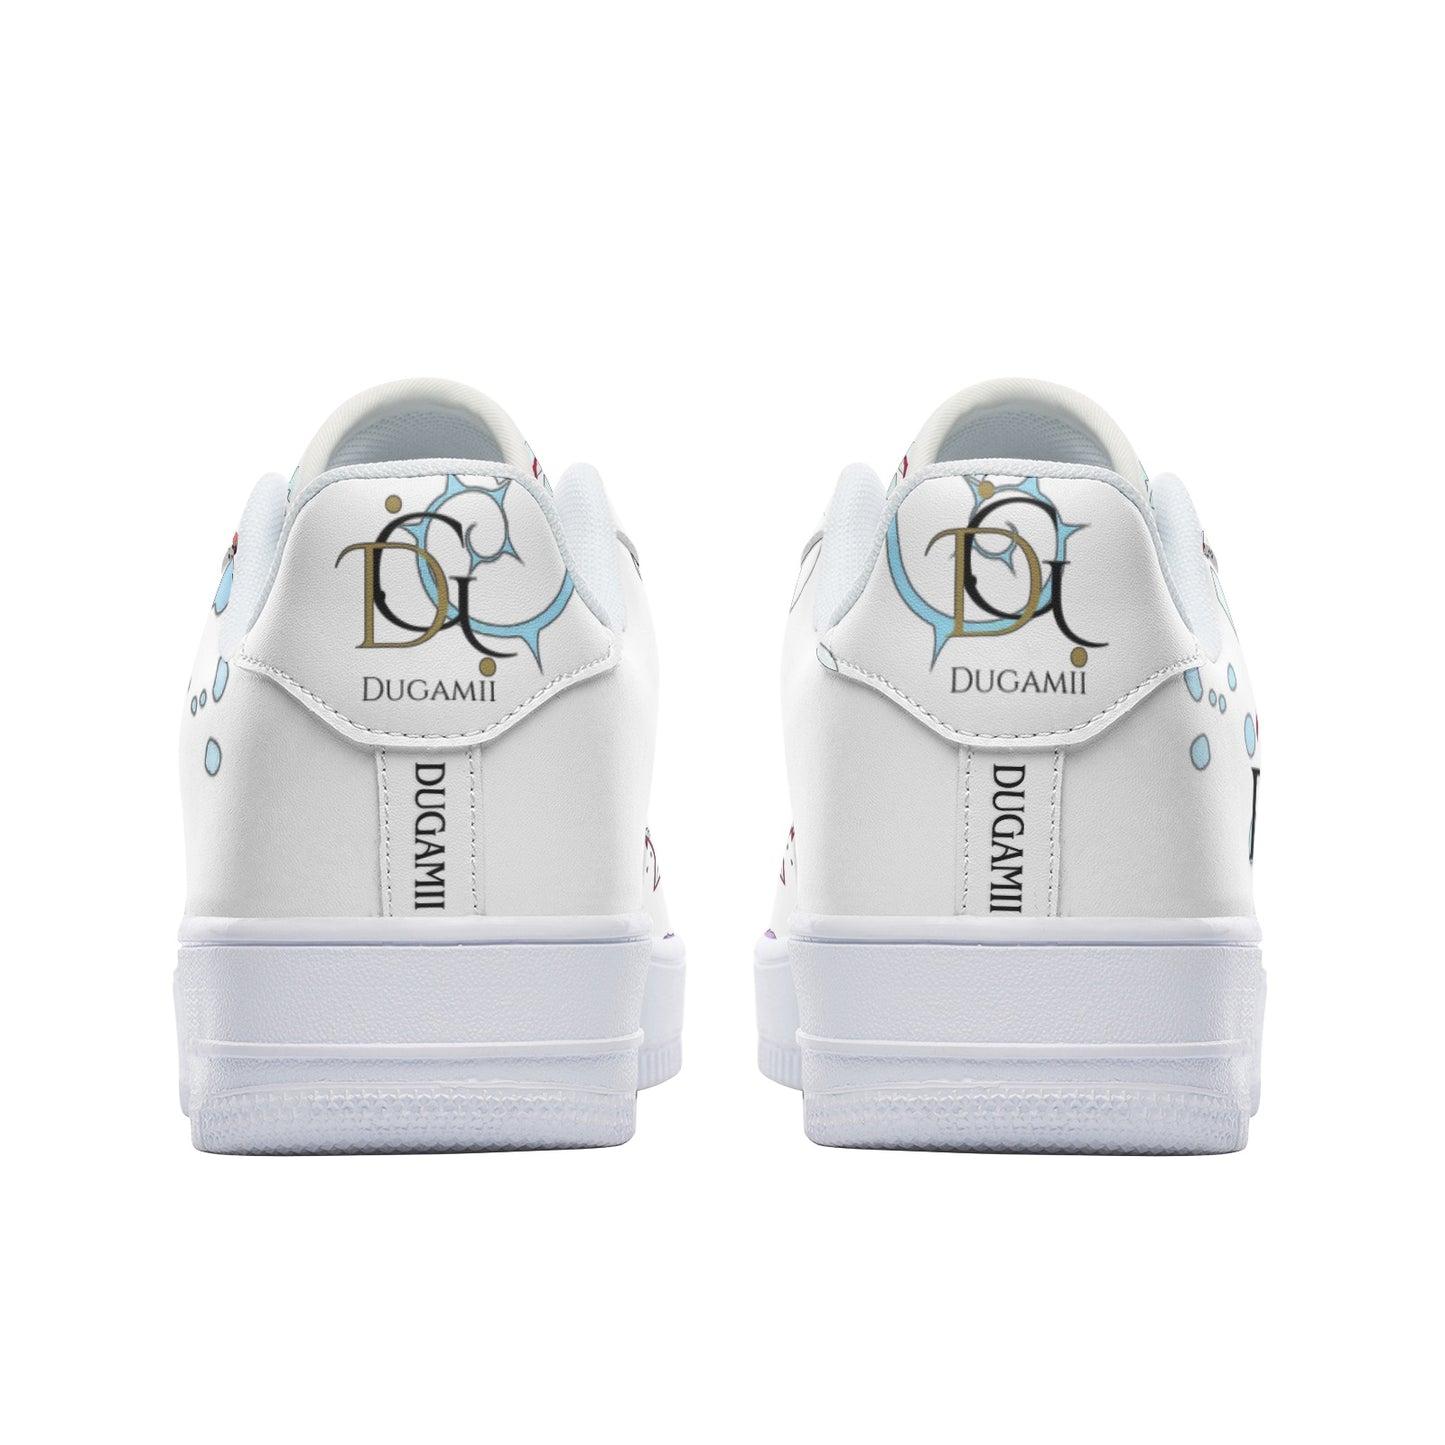 DuGamii Unisex Lock and Key Low Top Leather Sneakers